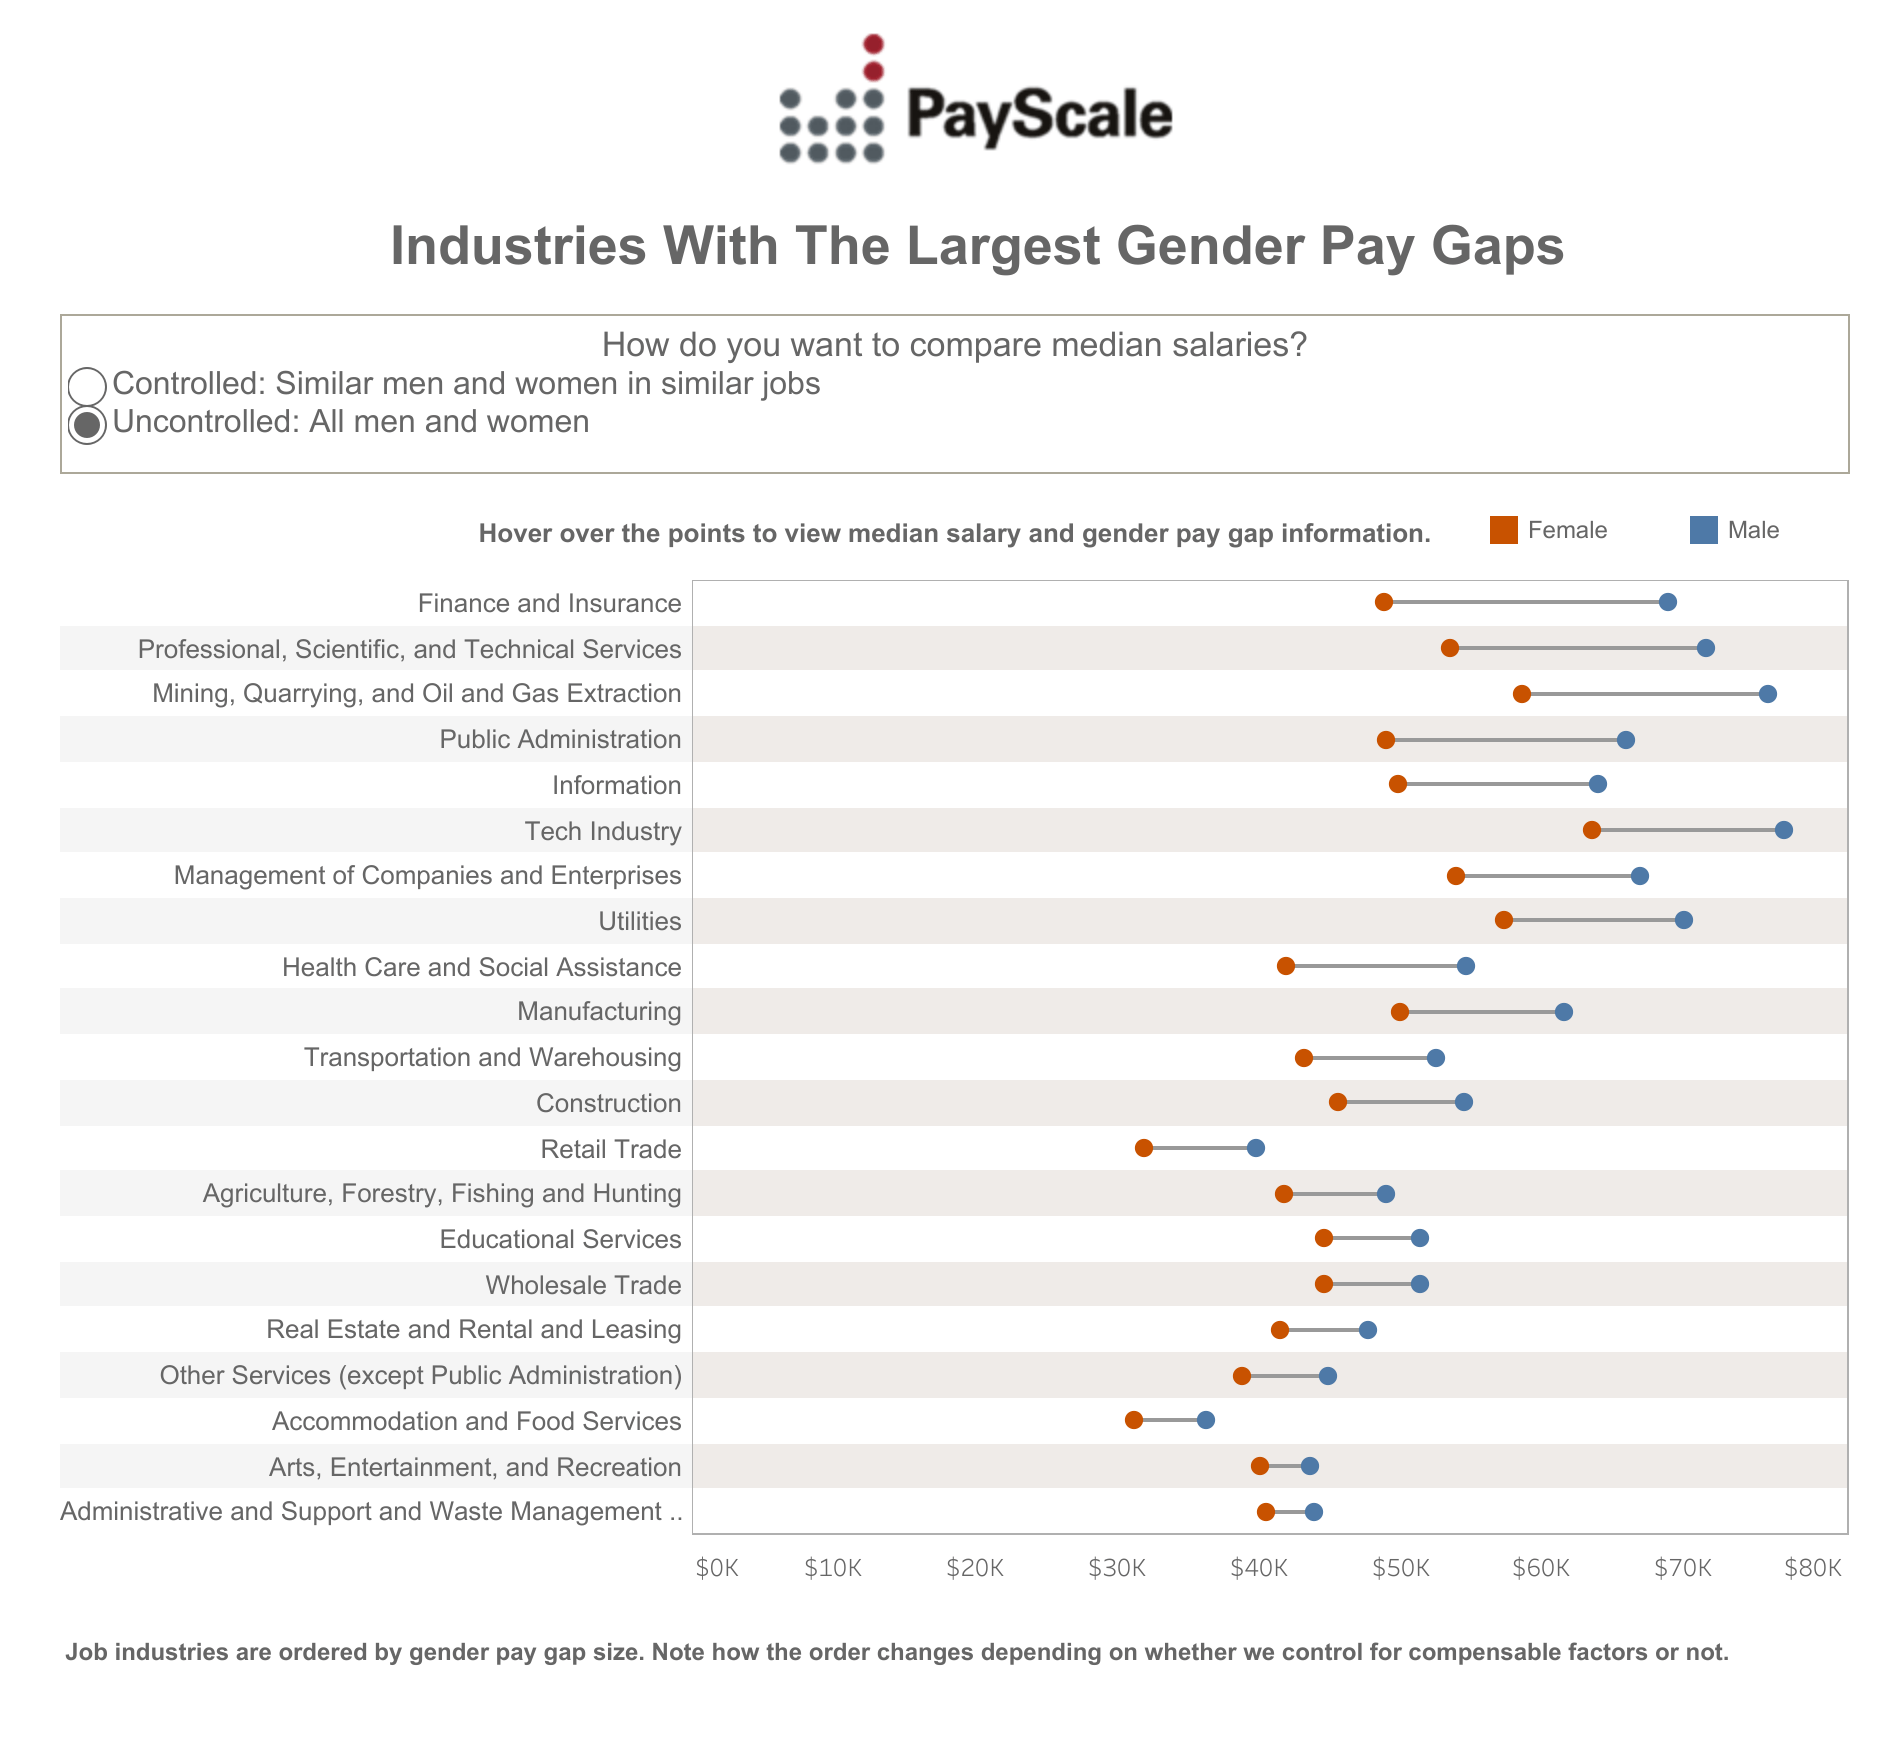 Dashboard on employee pay gaps